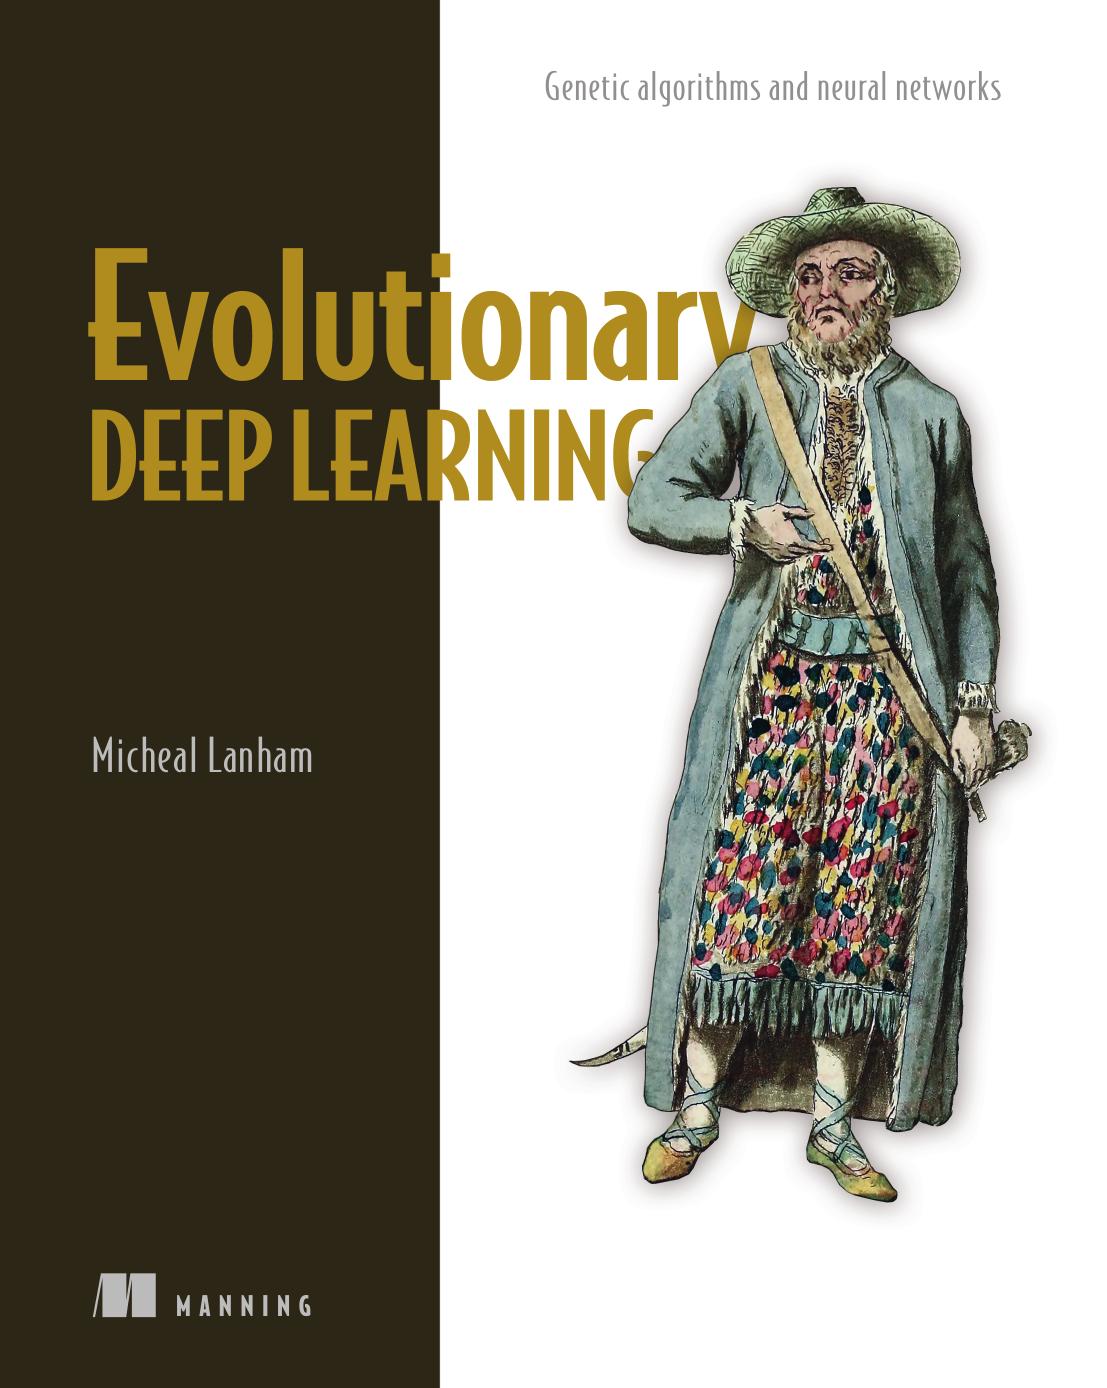 Evolutionary Deep Learning: Genetic Algorithms and Neural Networks